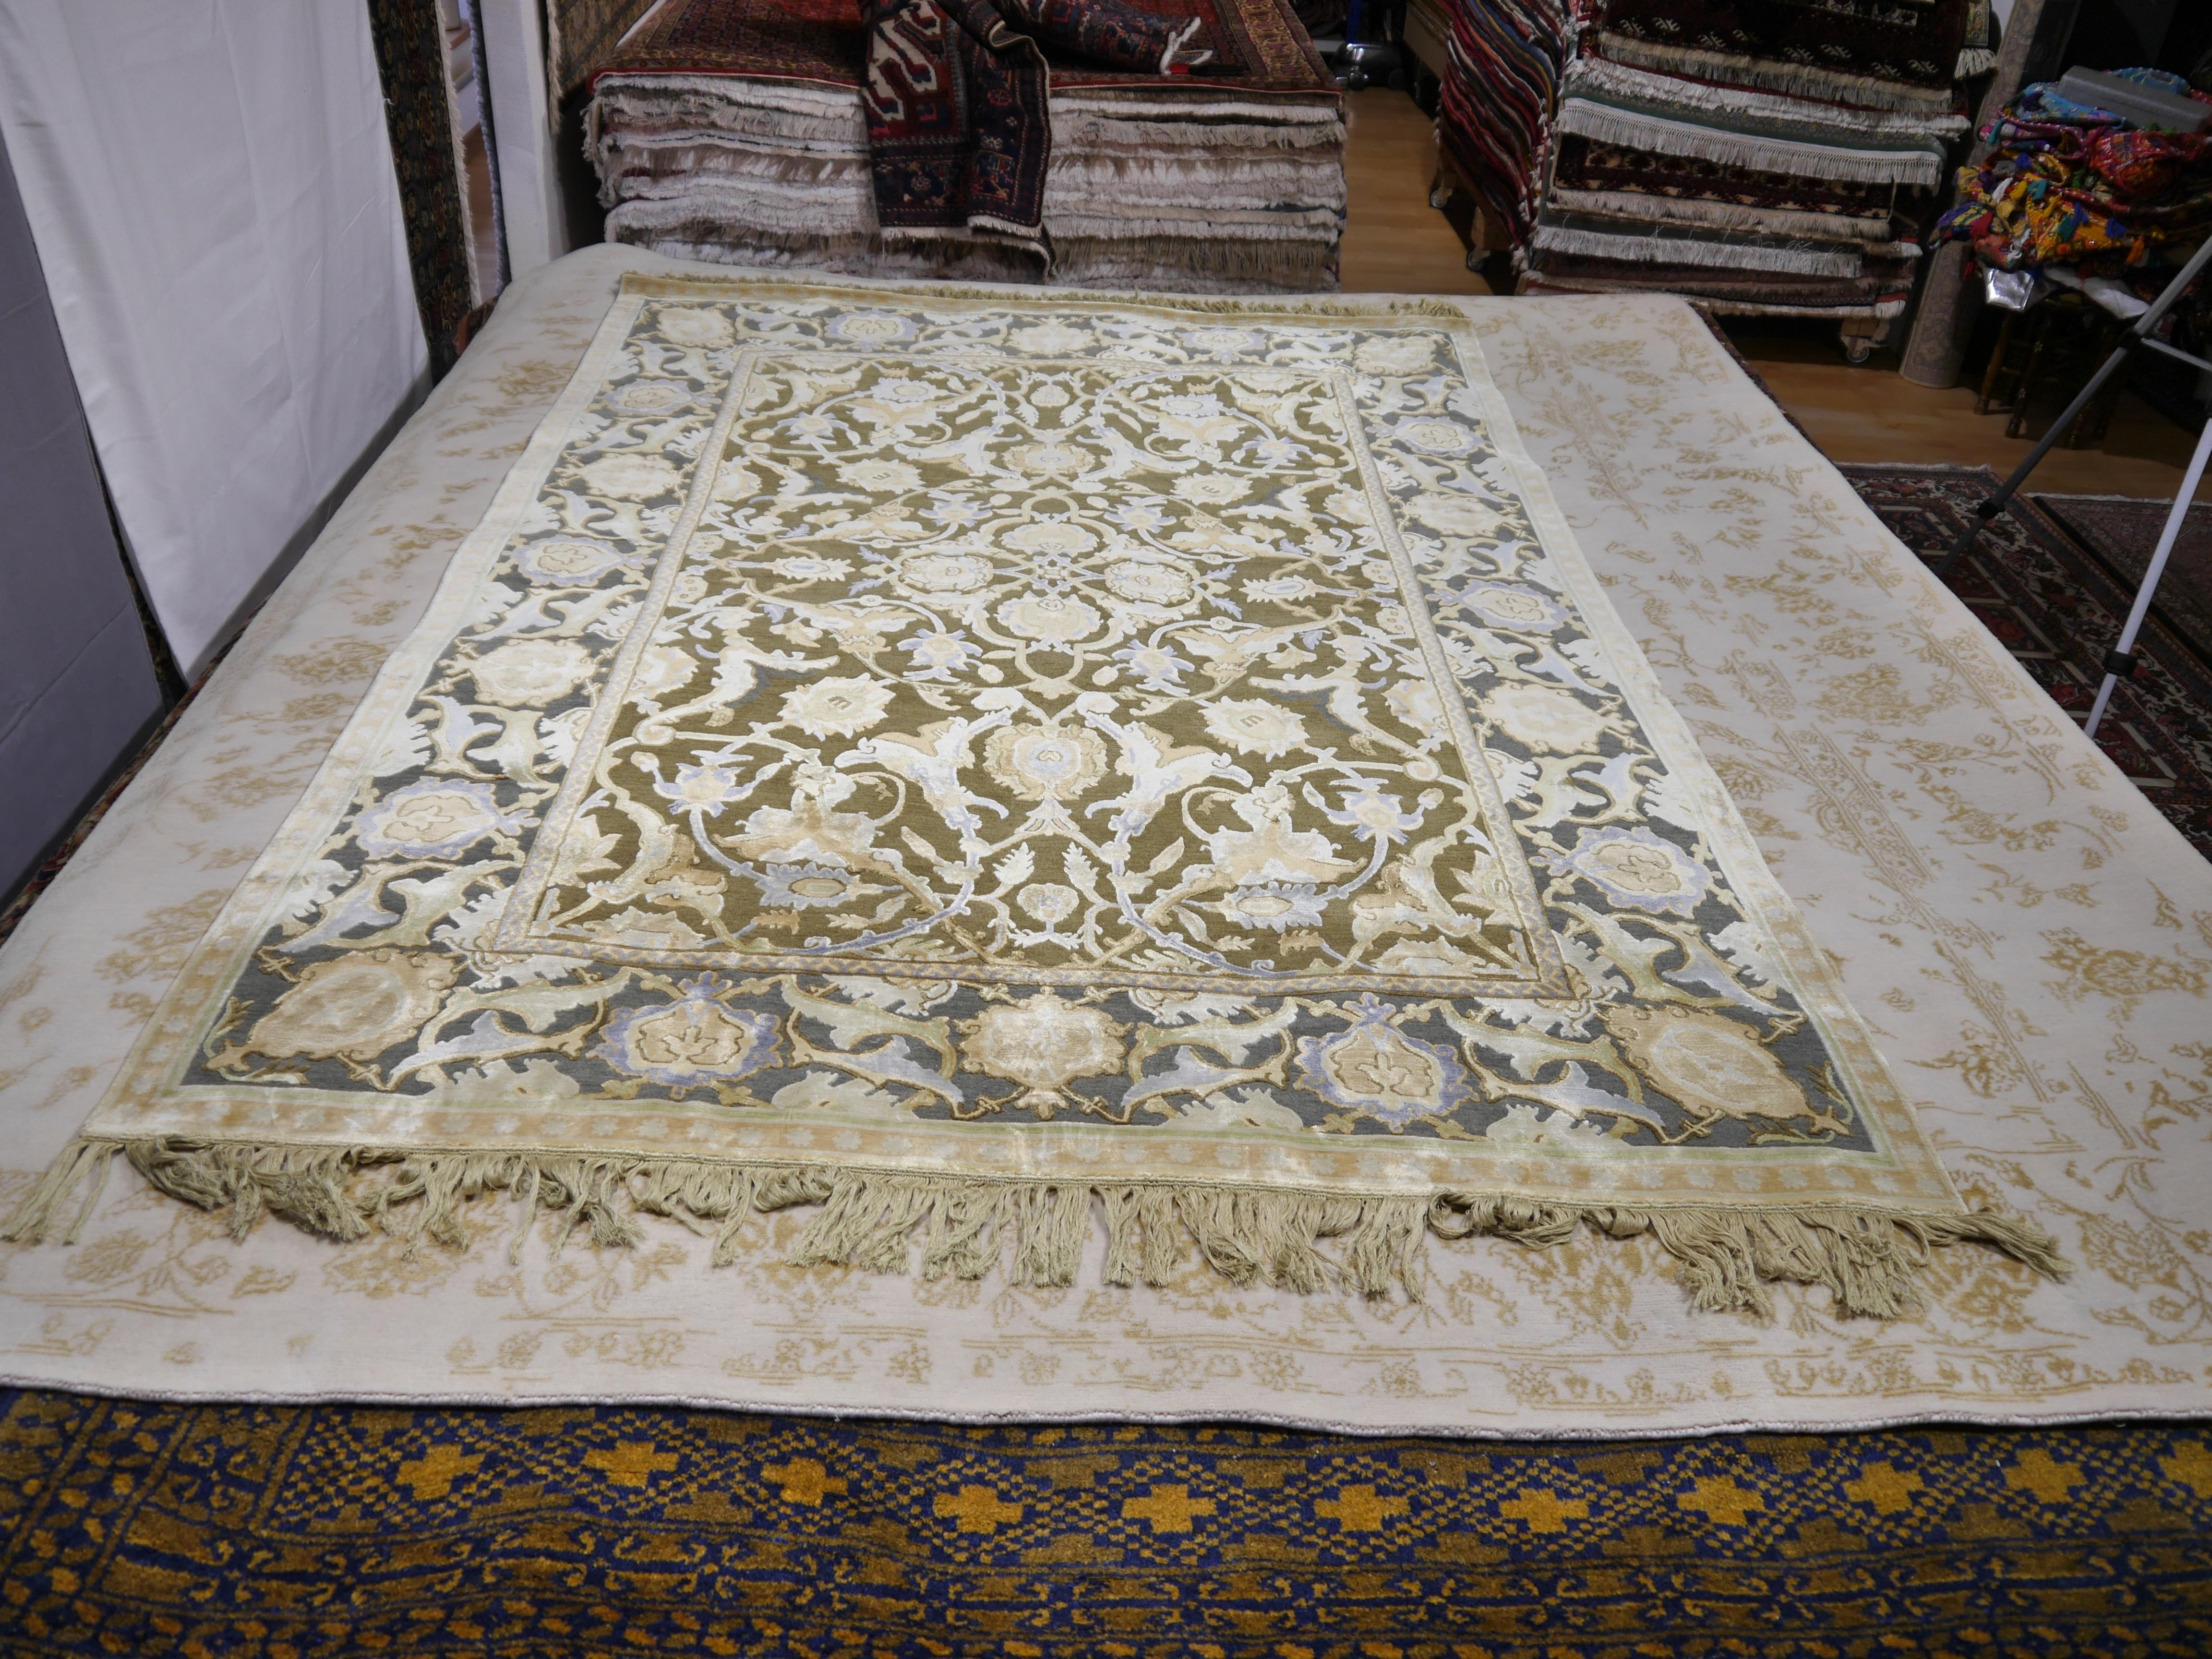 Renaissance New Polonaise Rug Silk and Wool Antique Isfahan Design Bespoke Sizes